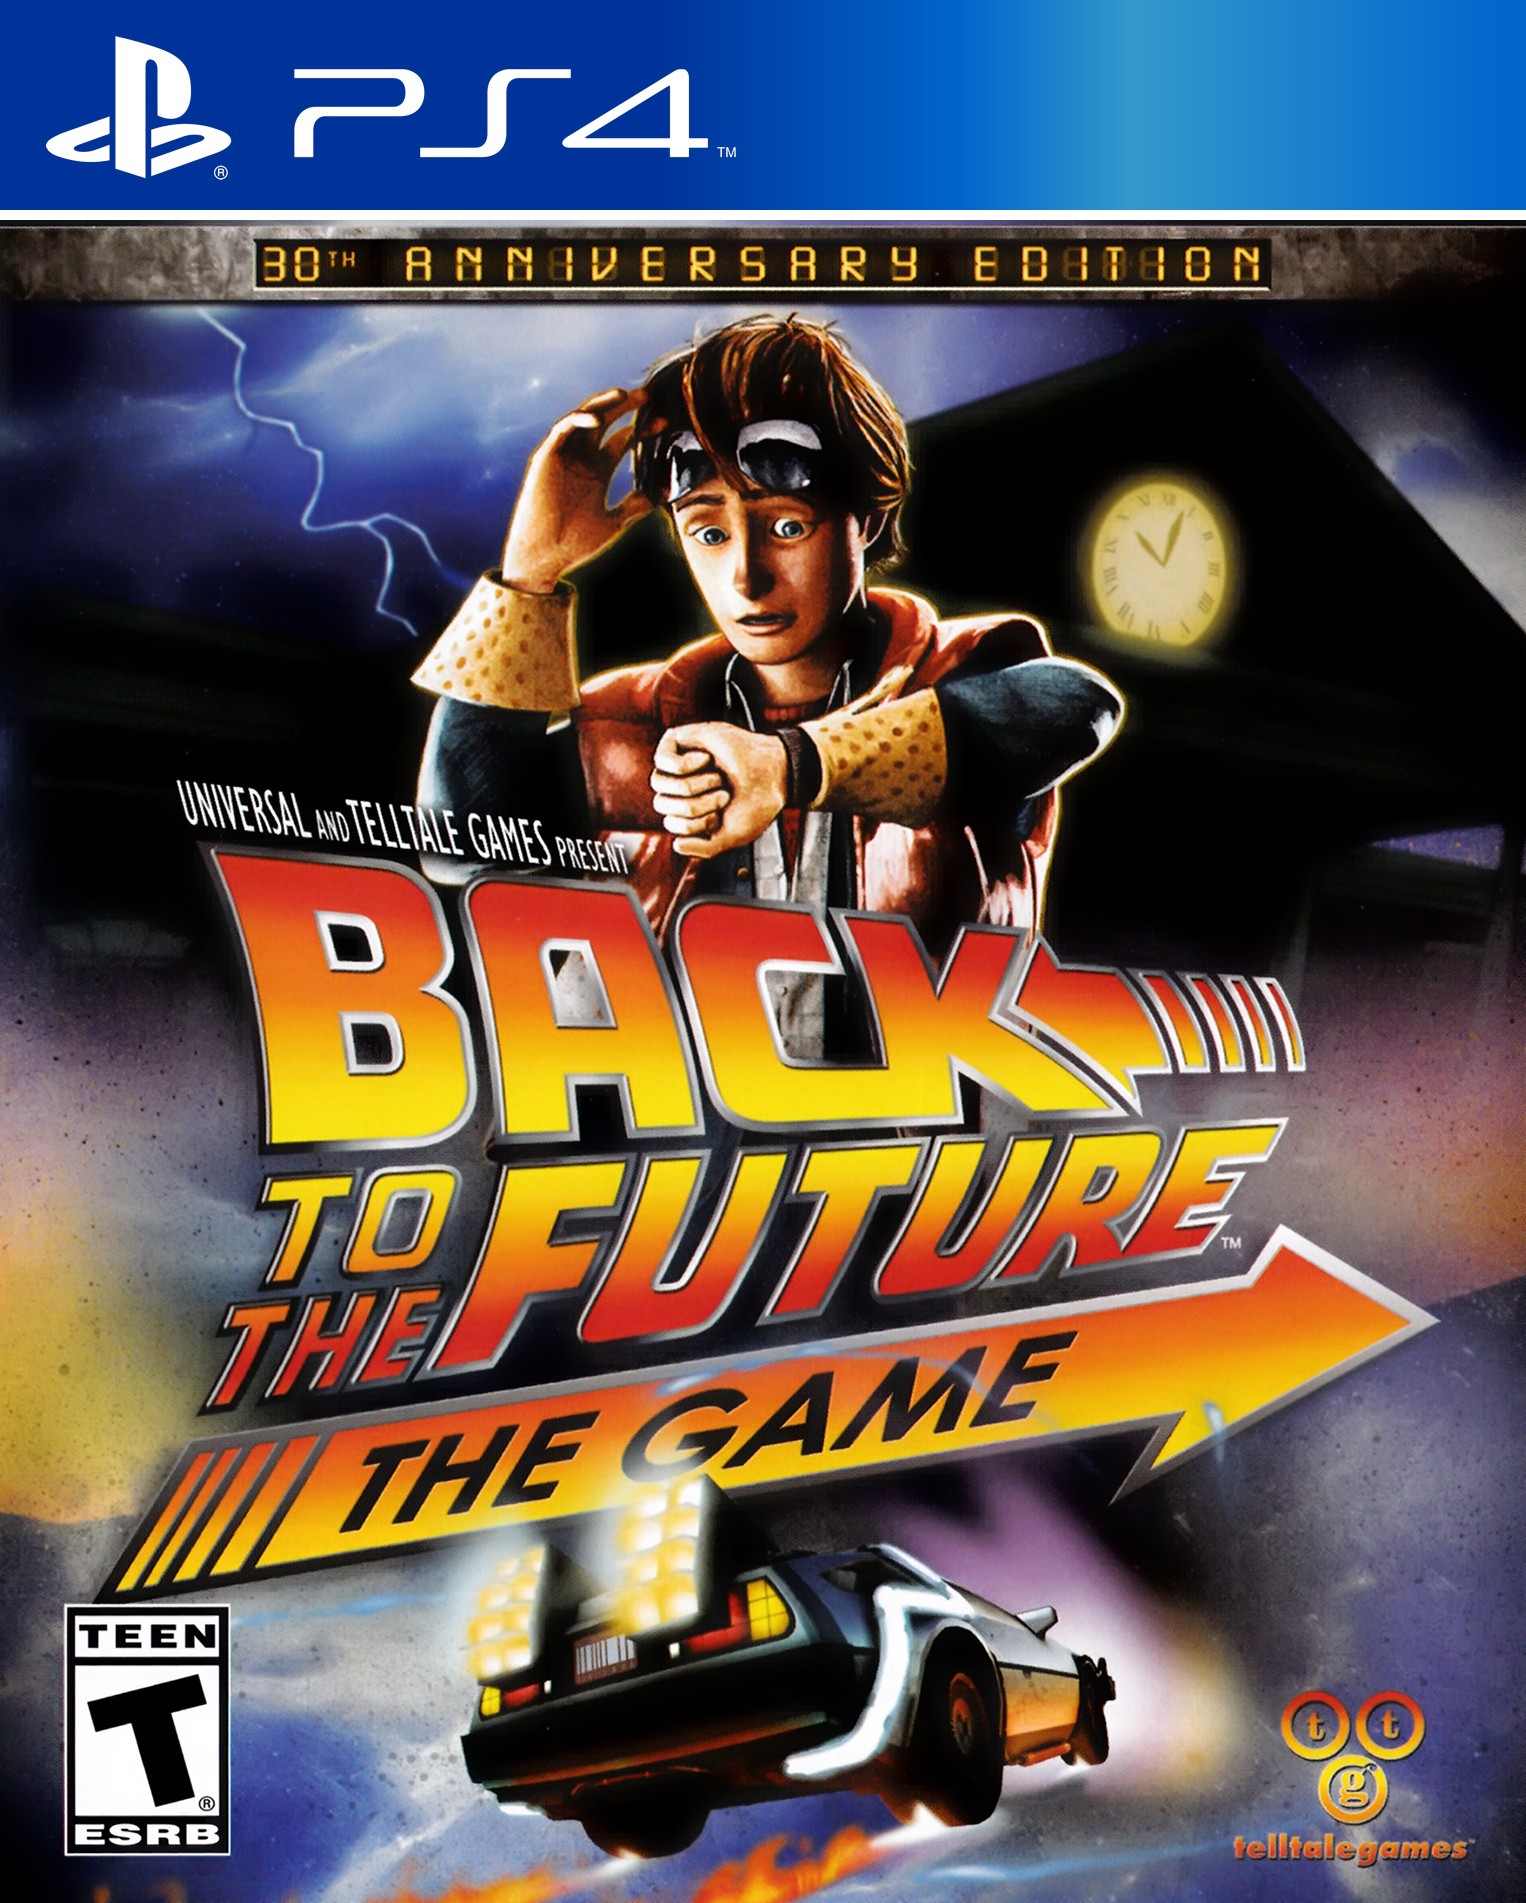 'Back to the Future: The Game'